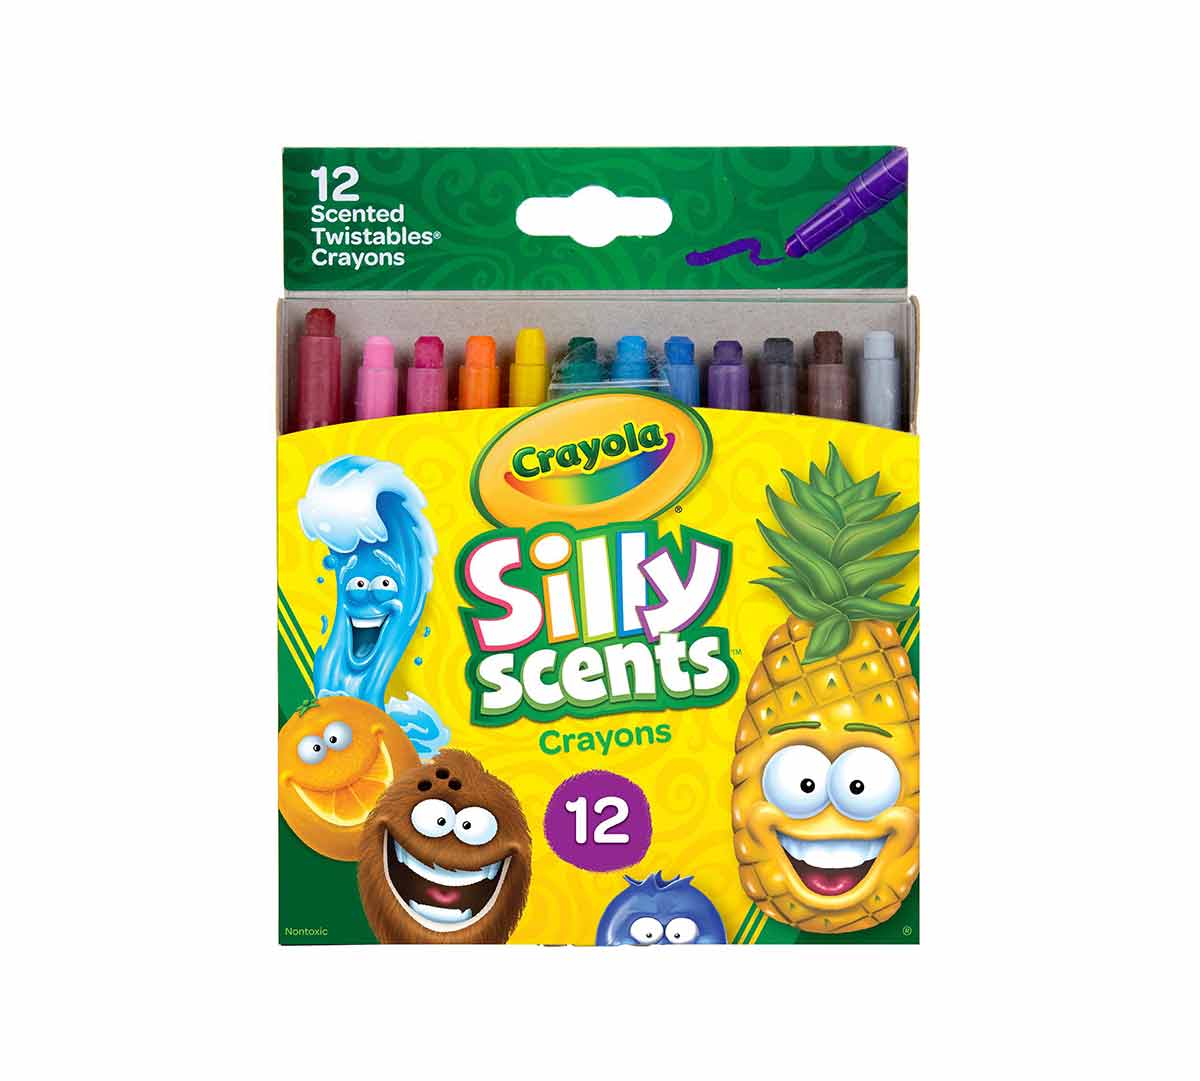 Crayola 12 Count Twistable Colored Pencils Only $1.50 (Reg. $6)